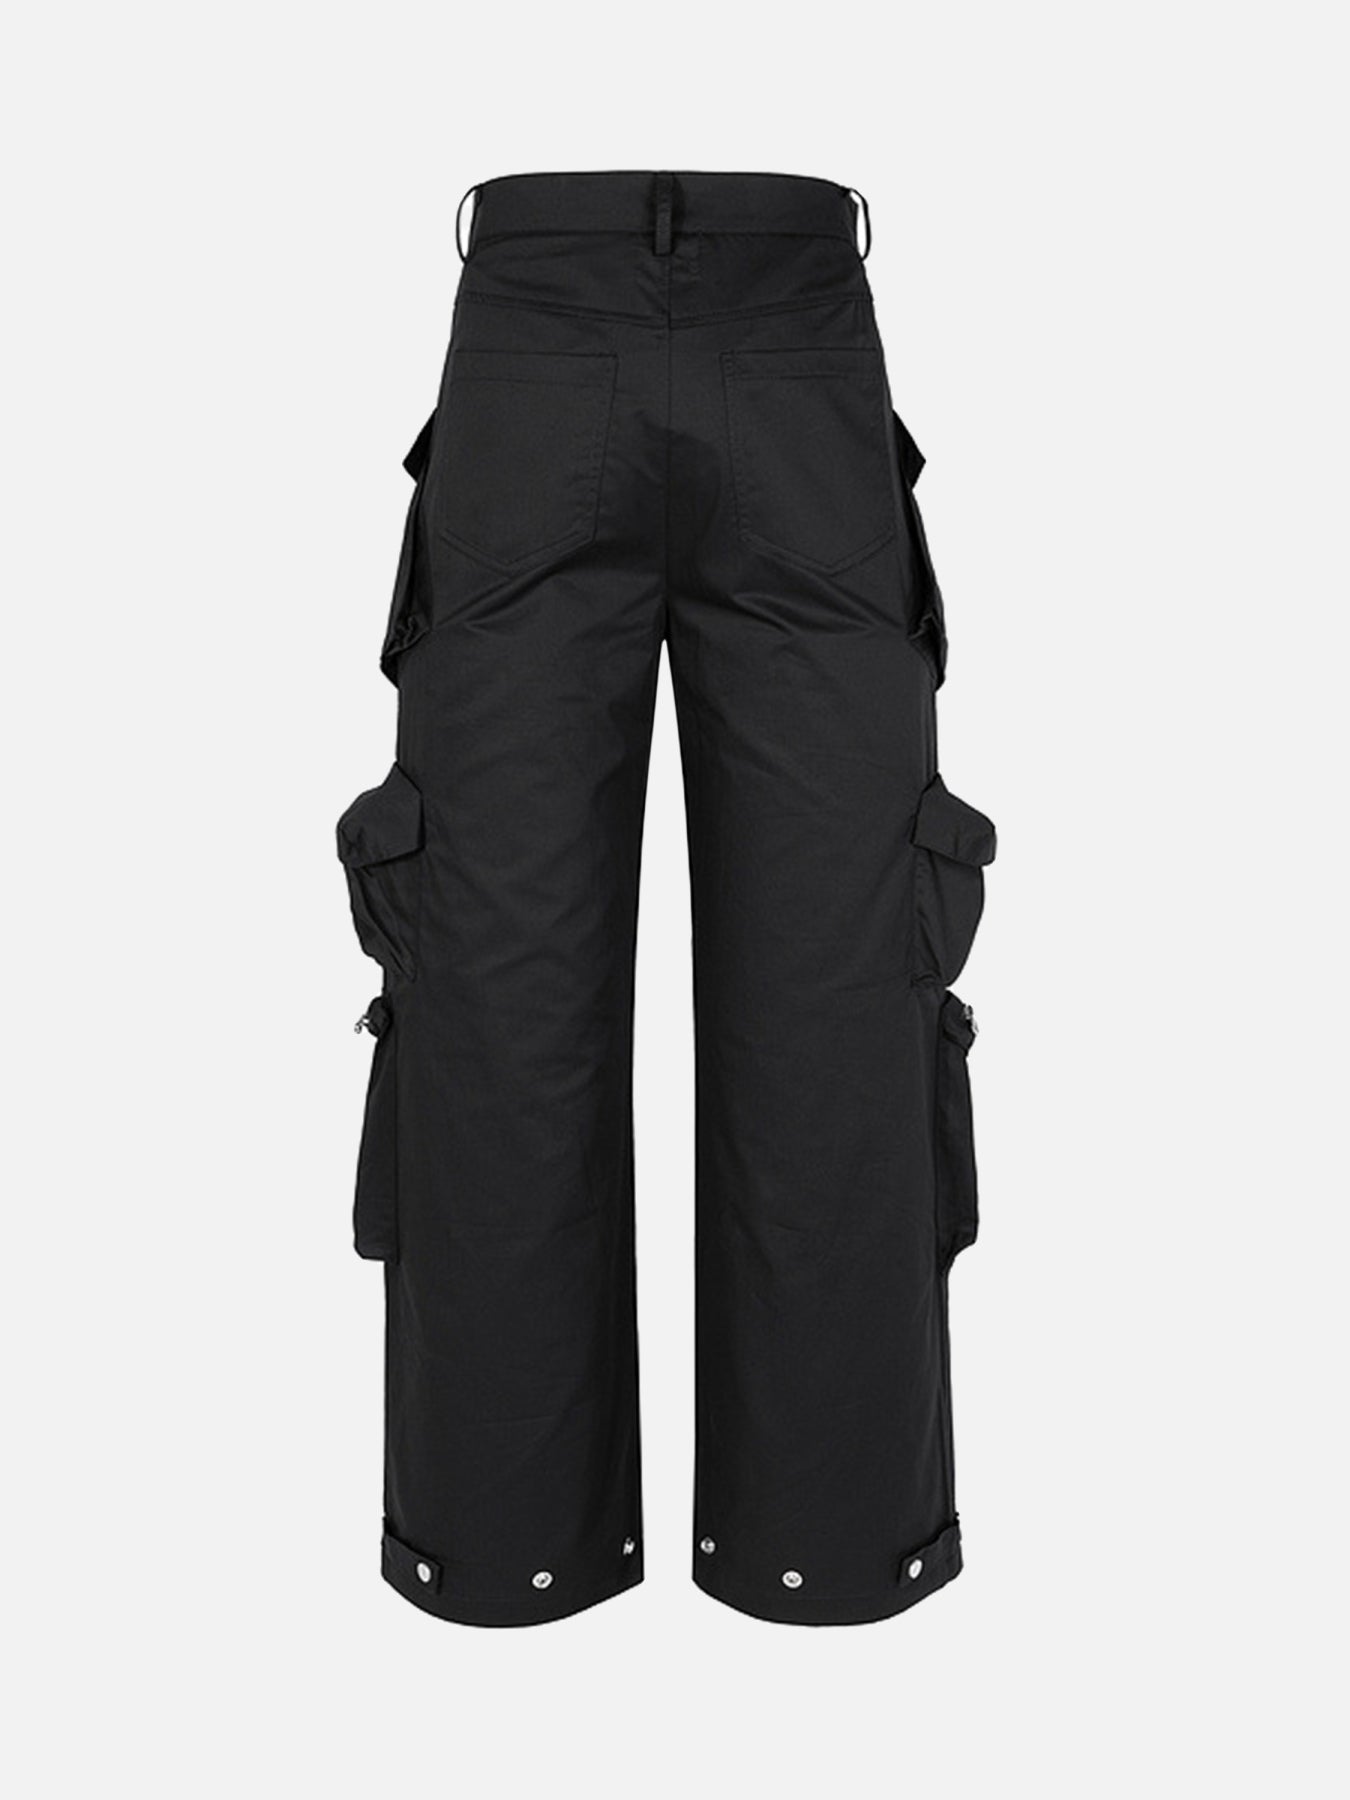 Thesupermade Multi-Pocket Functional Casual Workwear Wide Leg Pants 